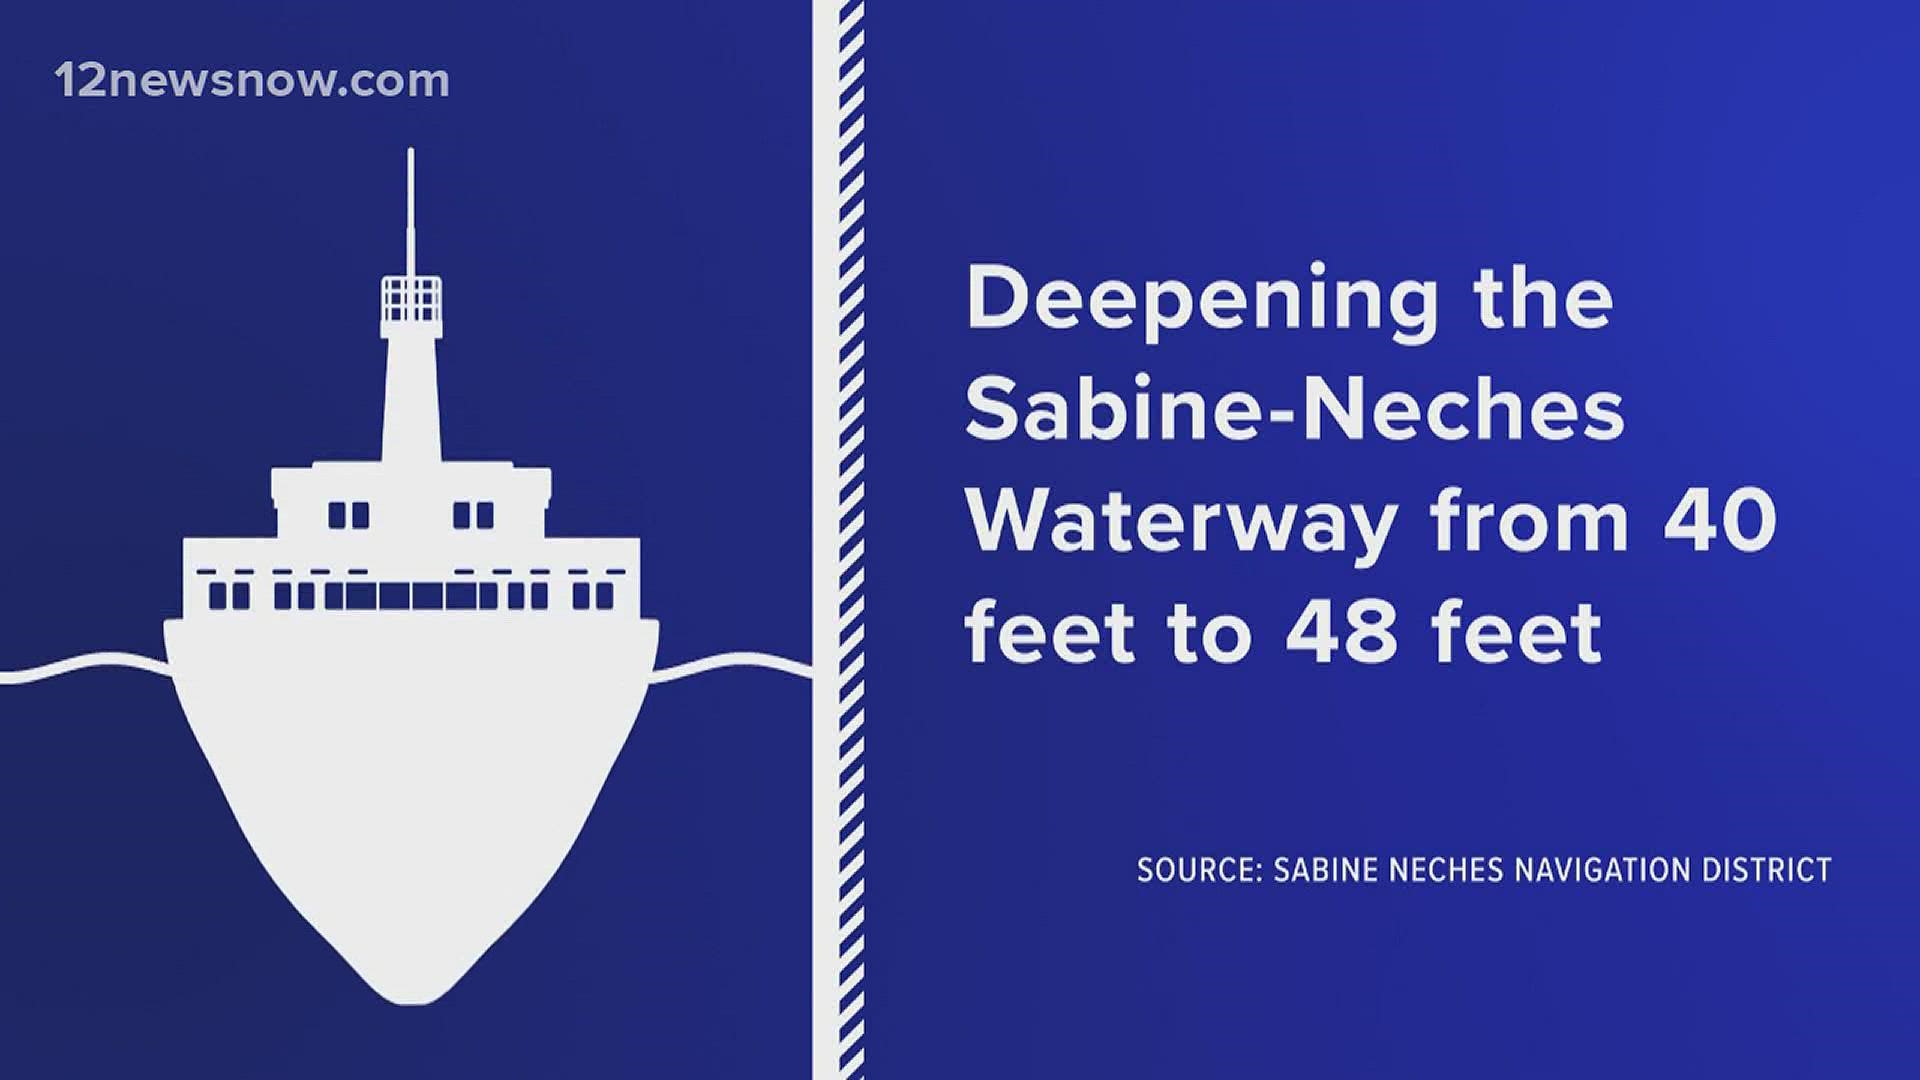 The Sabine Neches waterway is the third largest waterway in the nation.